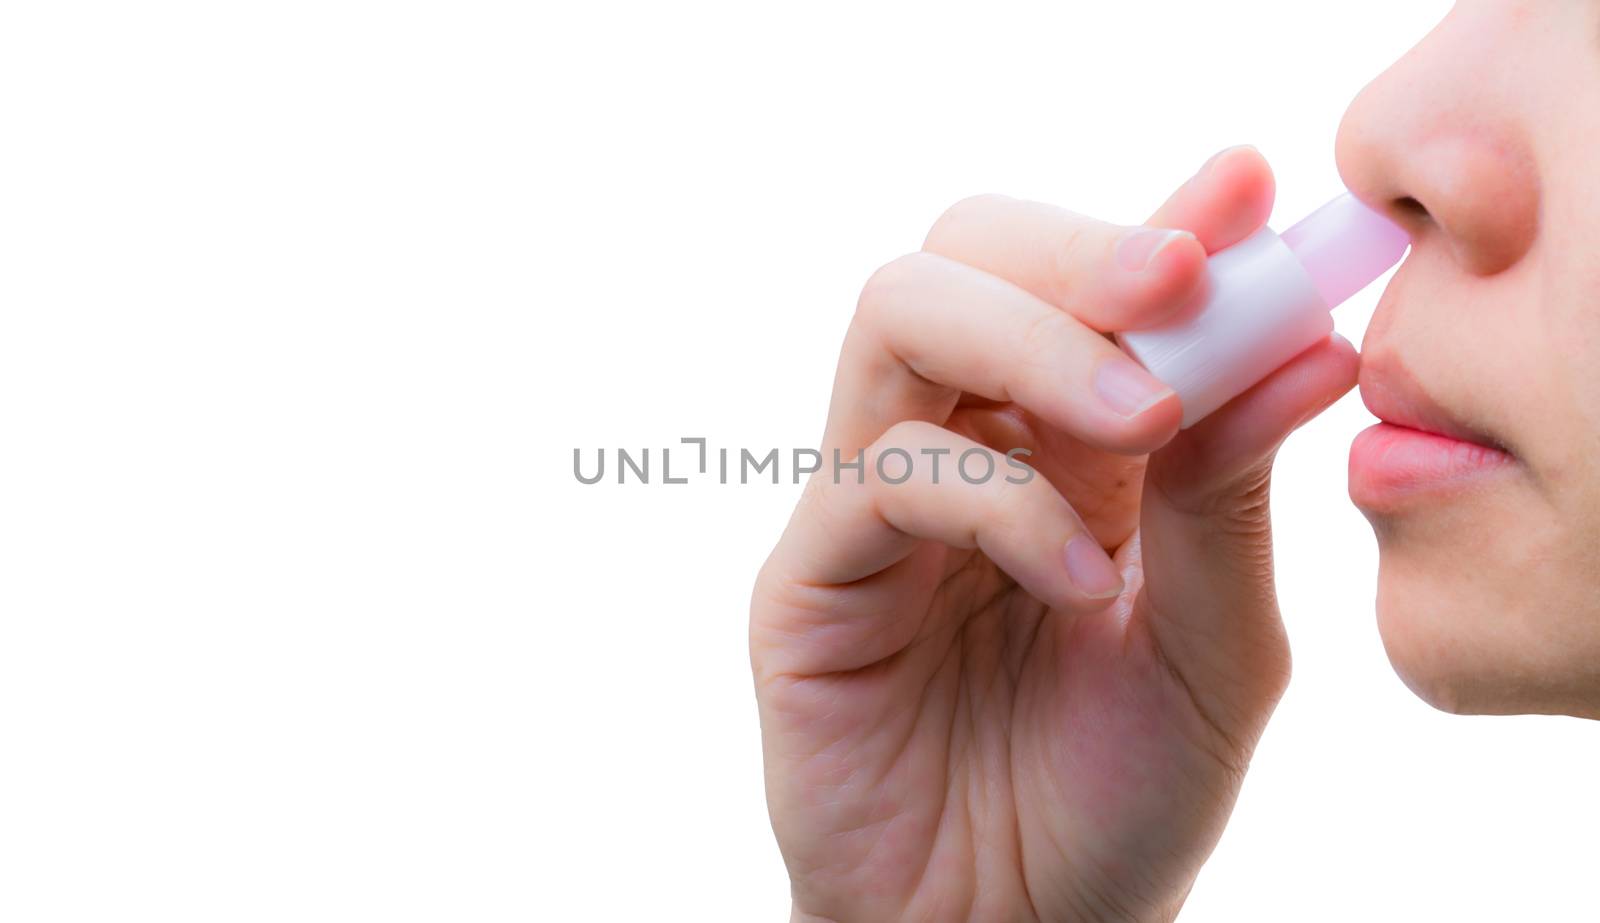 Asian Woman's hand hold nasal inhaler and inhale through nostril to relief nasal congestion for breathing more comfortable and help relieve the symptoms of motion sickness, relief vertigo, feel faint.